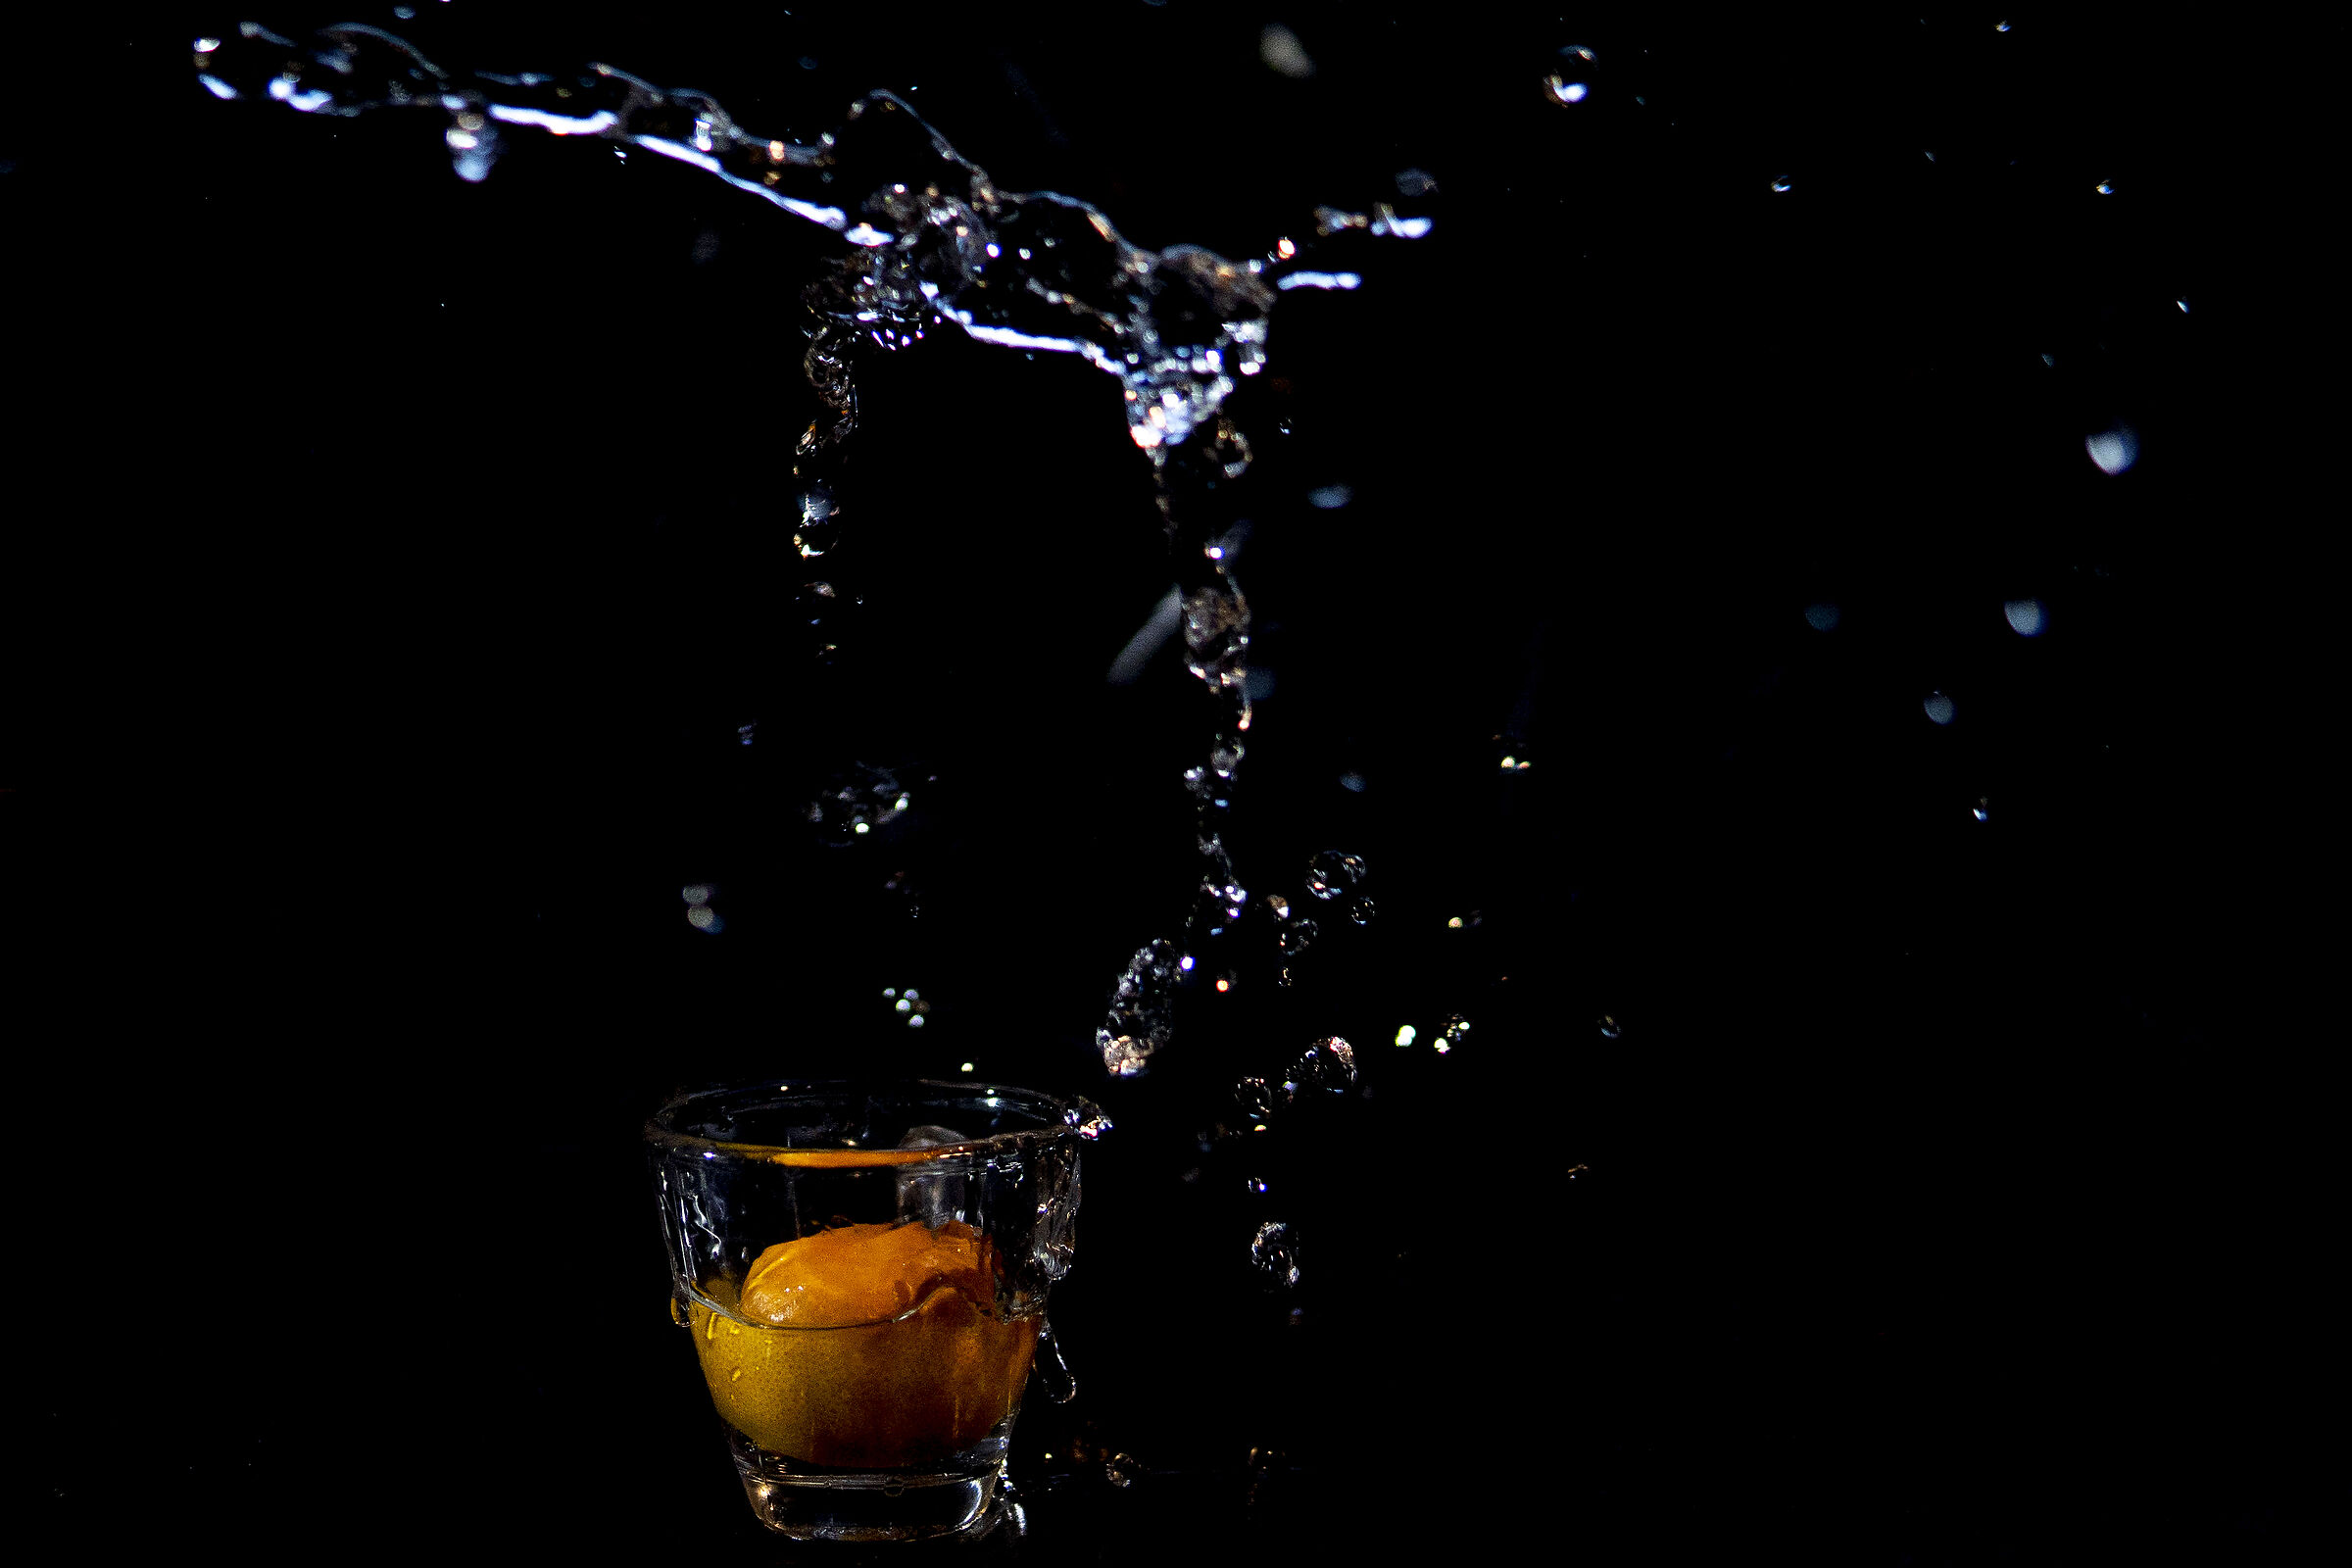 Water Drop Photography  - In fase di sviluppo -...